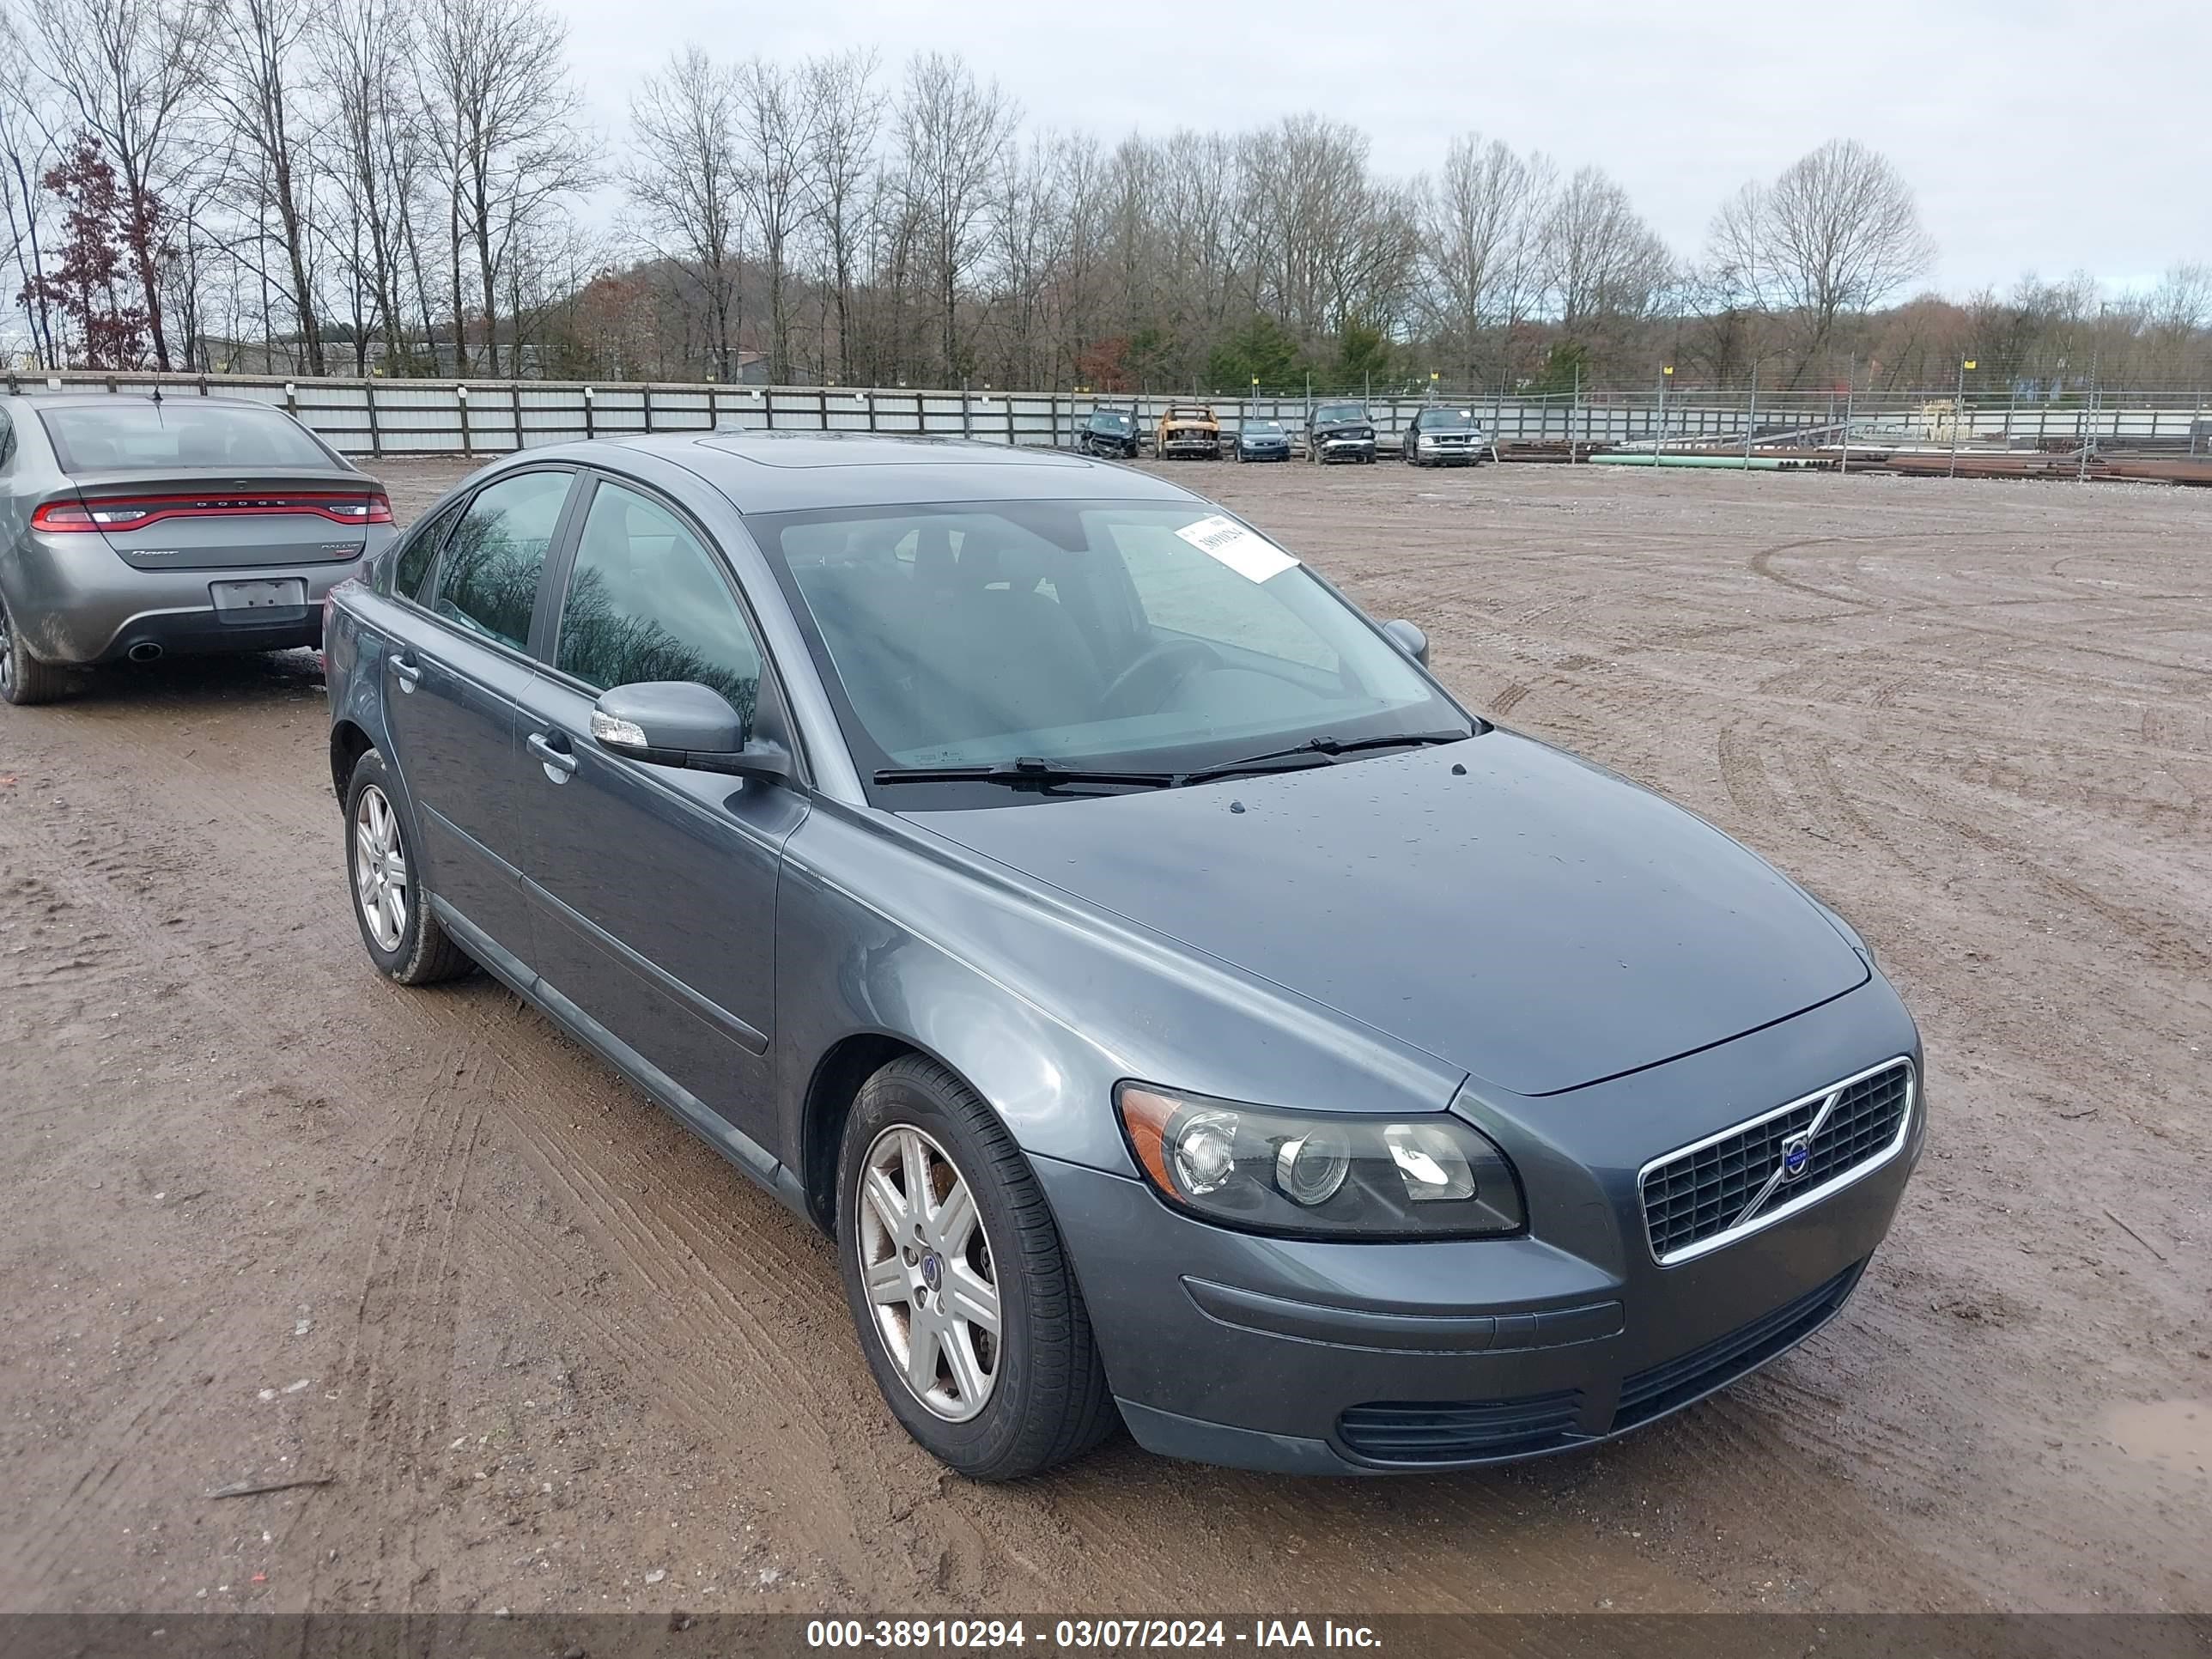 vin: YV1MS382472297267 YV1MS382472297267 2007 volvo s40 2400 for Sale in 37914, 3634 E. Governor John Sevier Hwy, Knoxville, Tennessee, USA